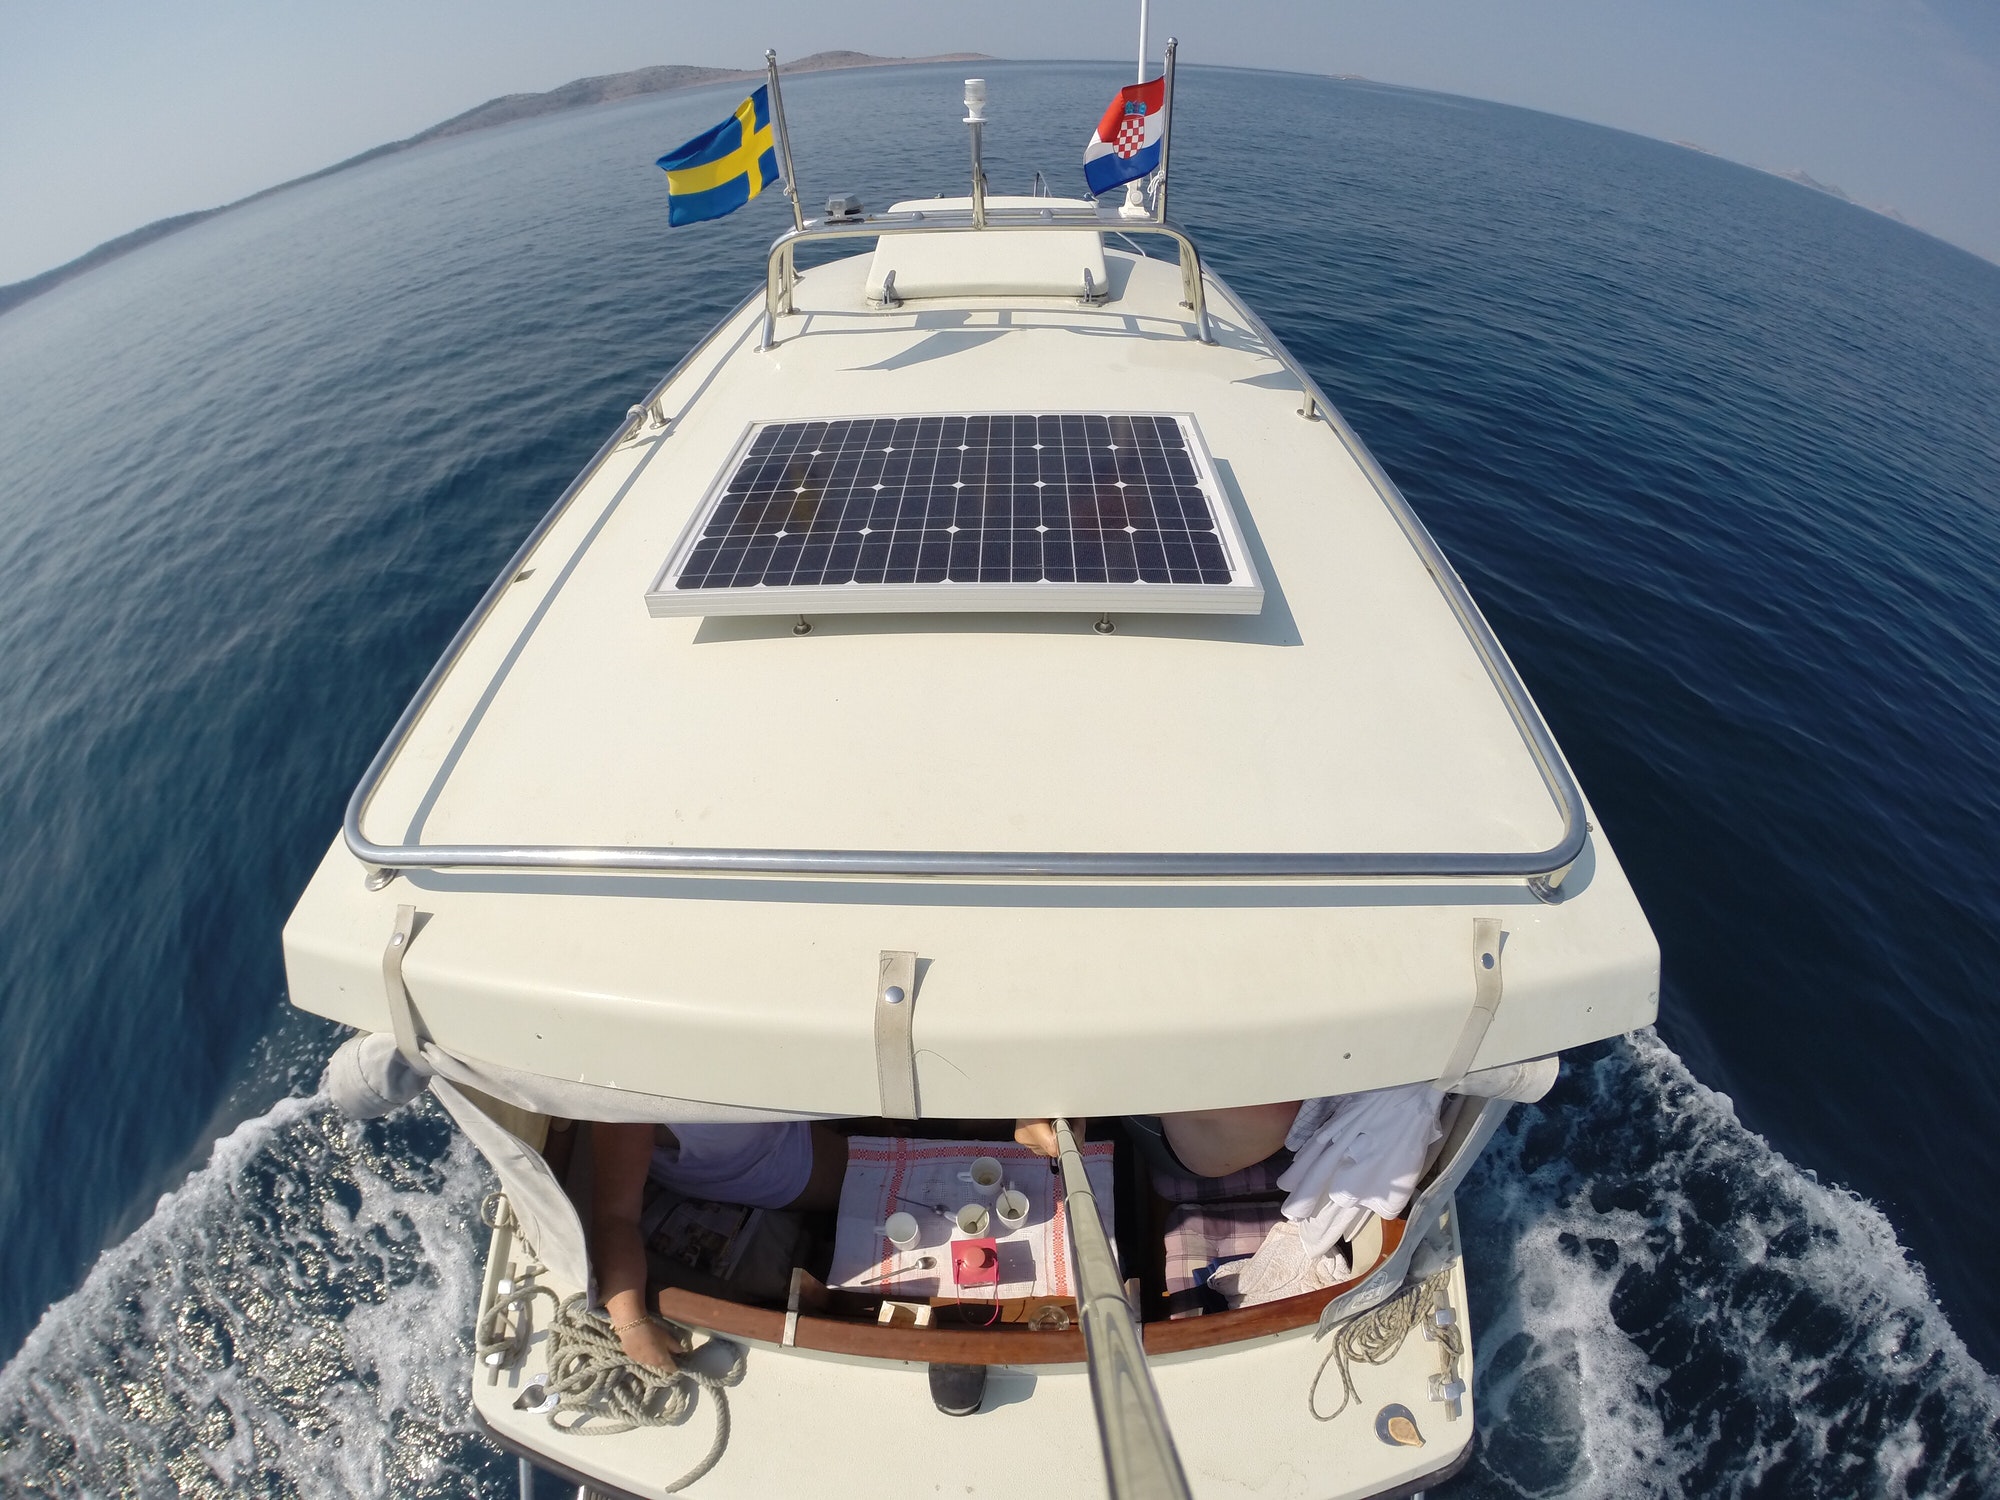 Charging a Boat With Solar Power